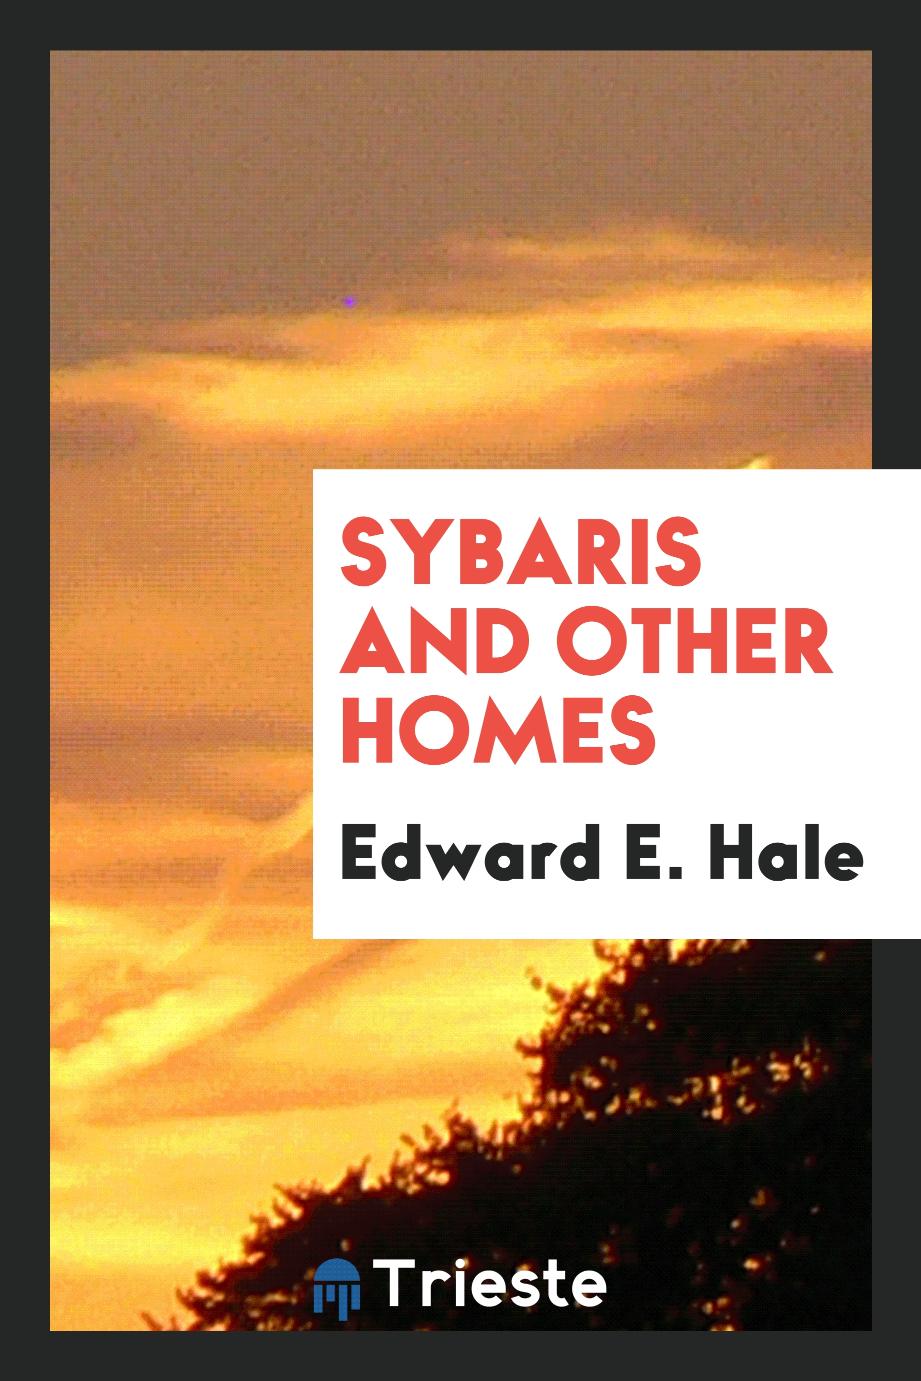 Sybaris and other homes